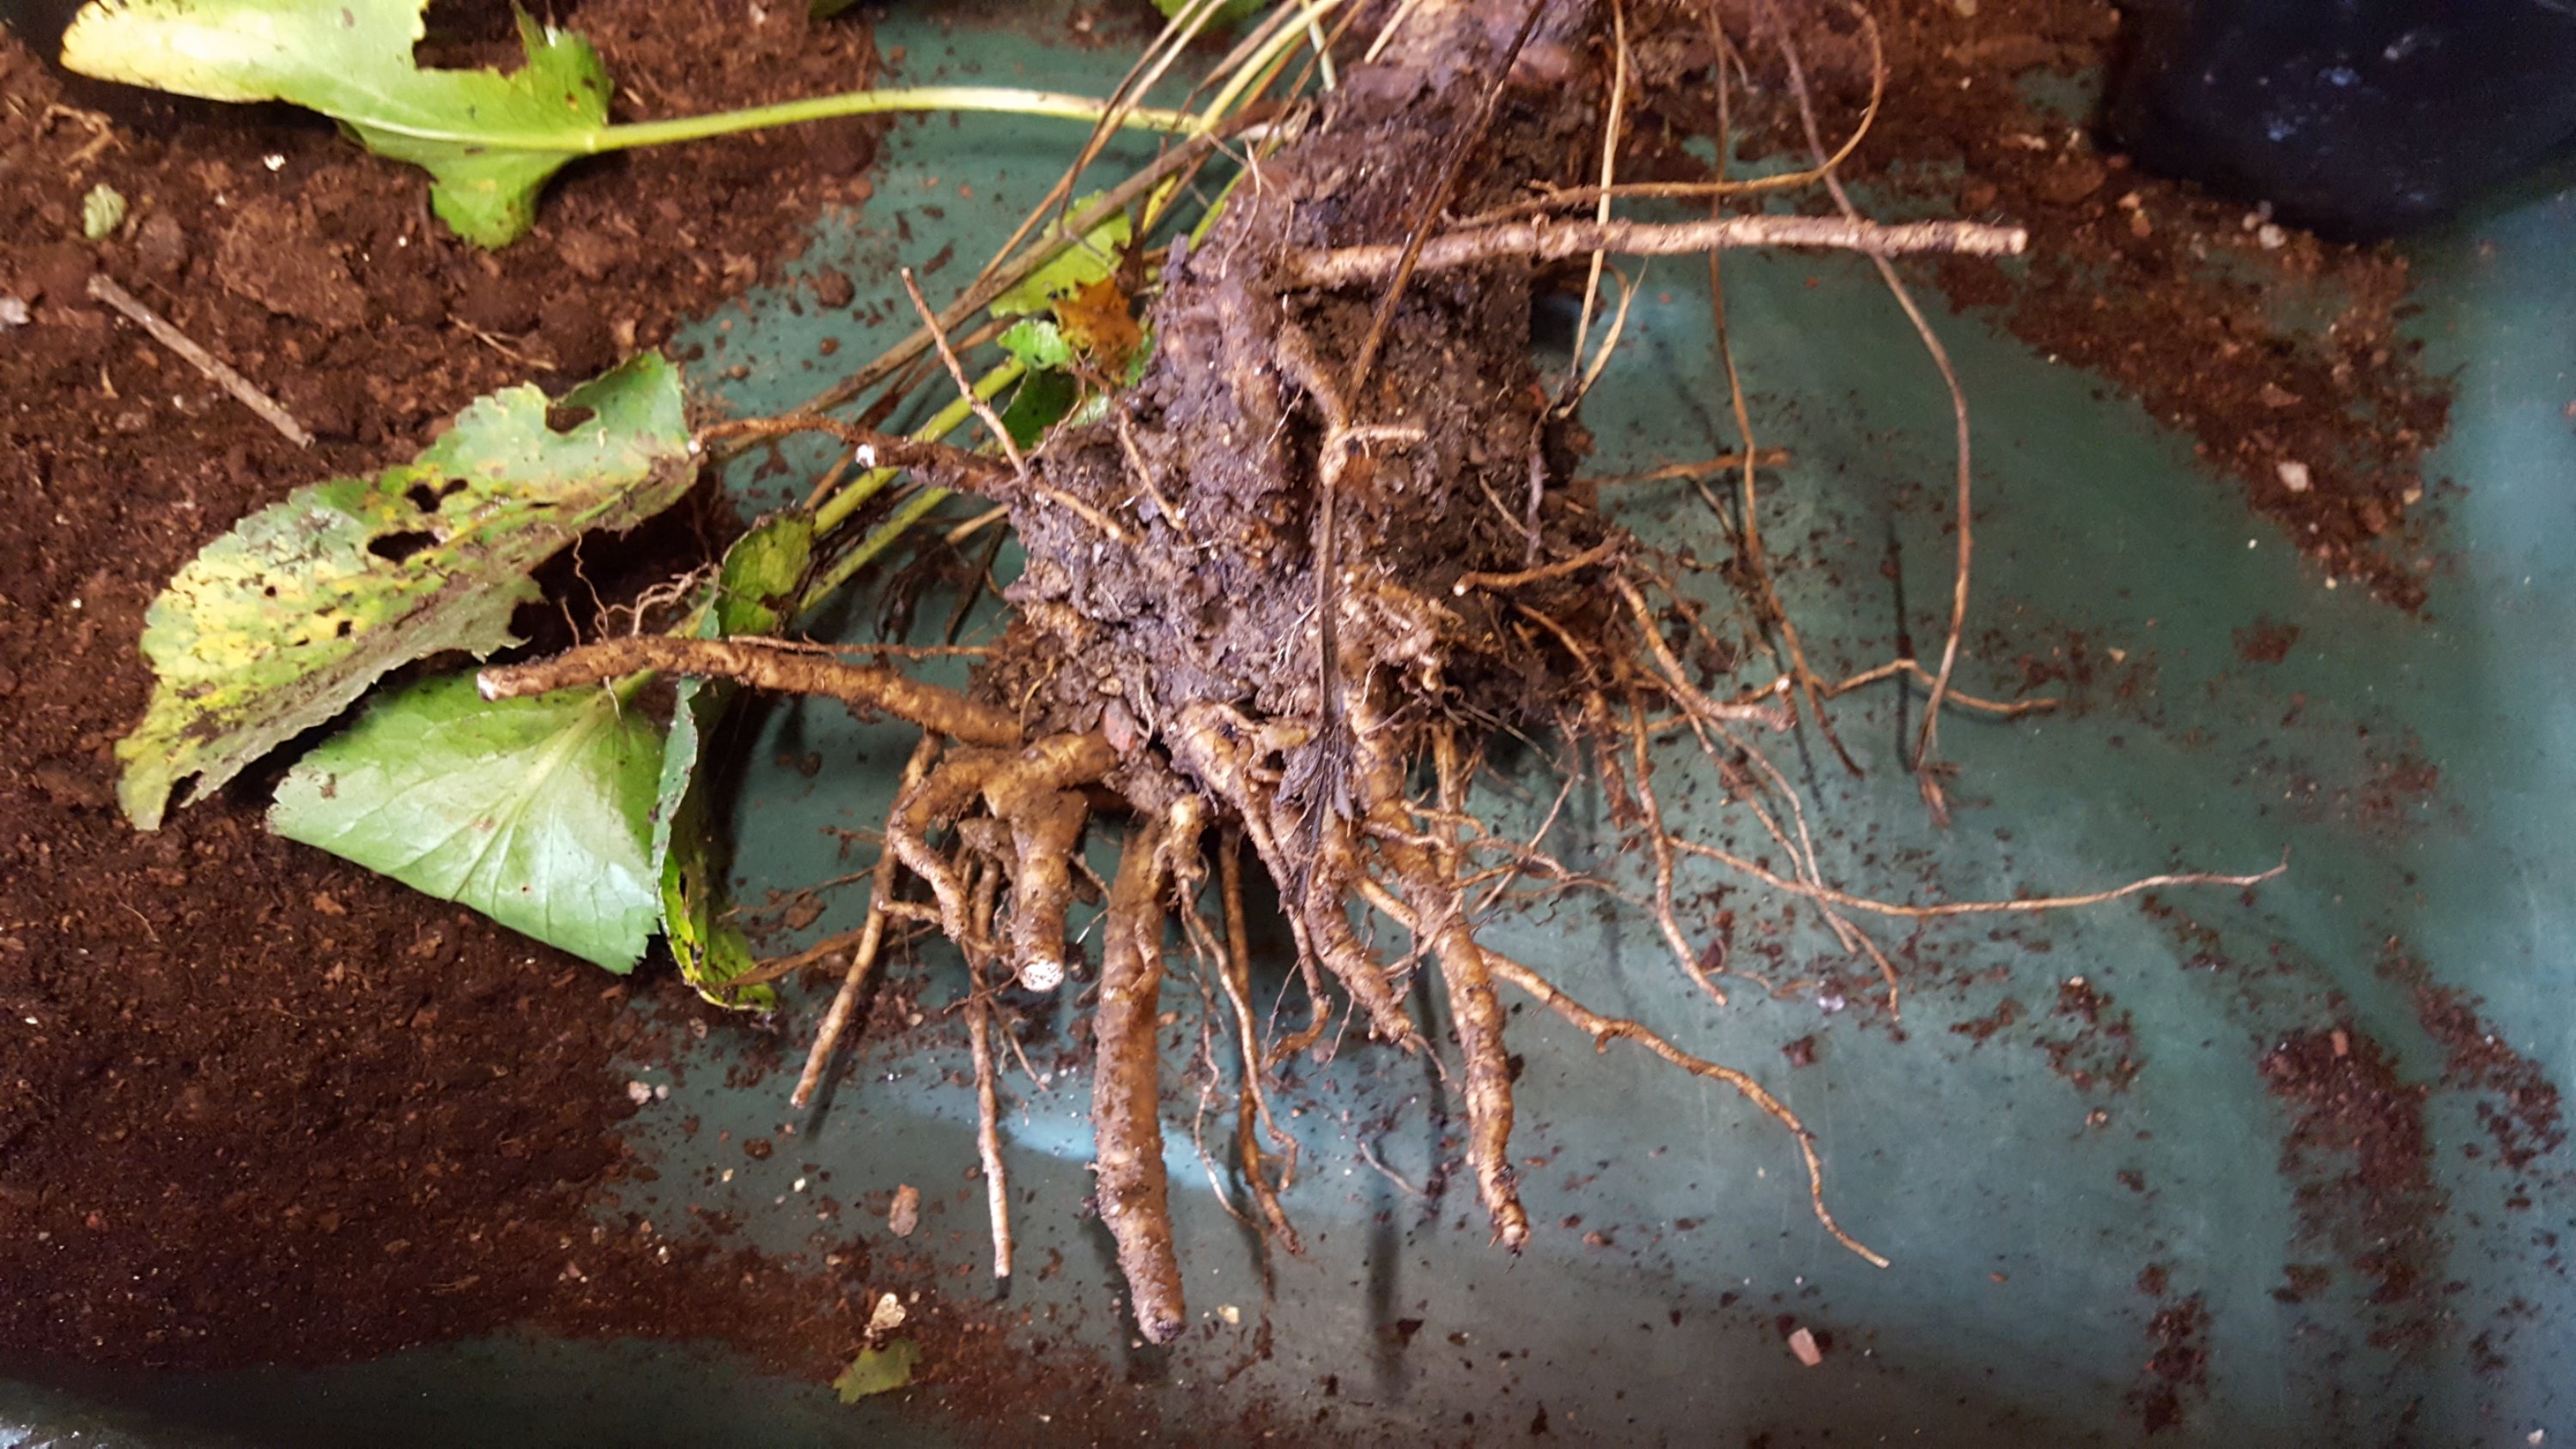 Propagating eryngium by root cuttings